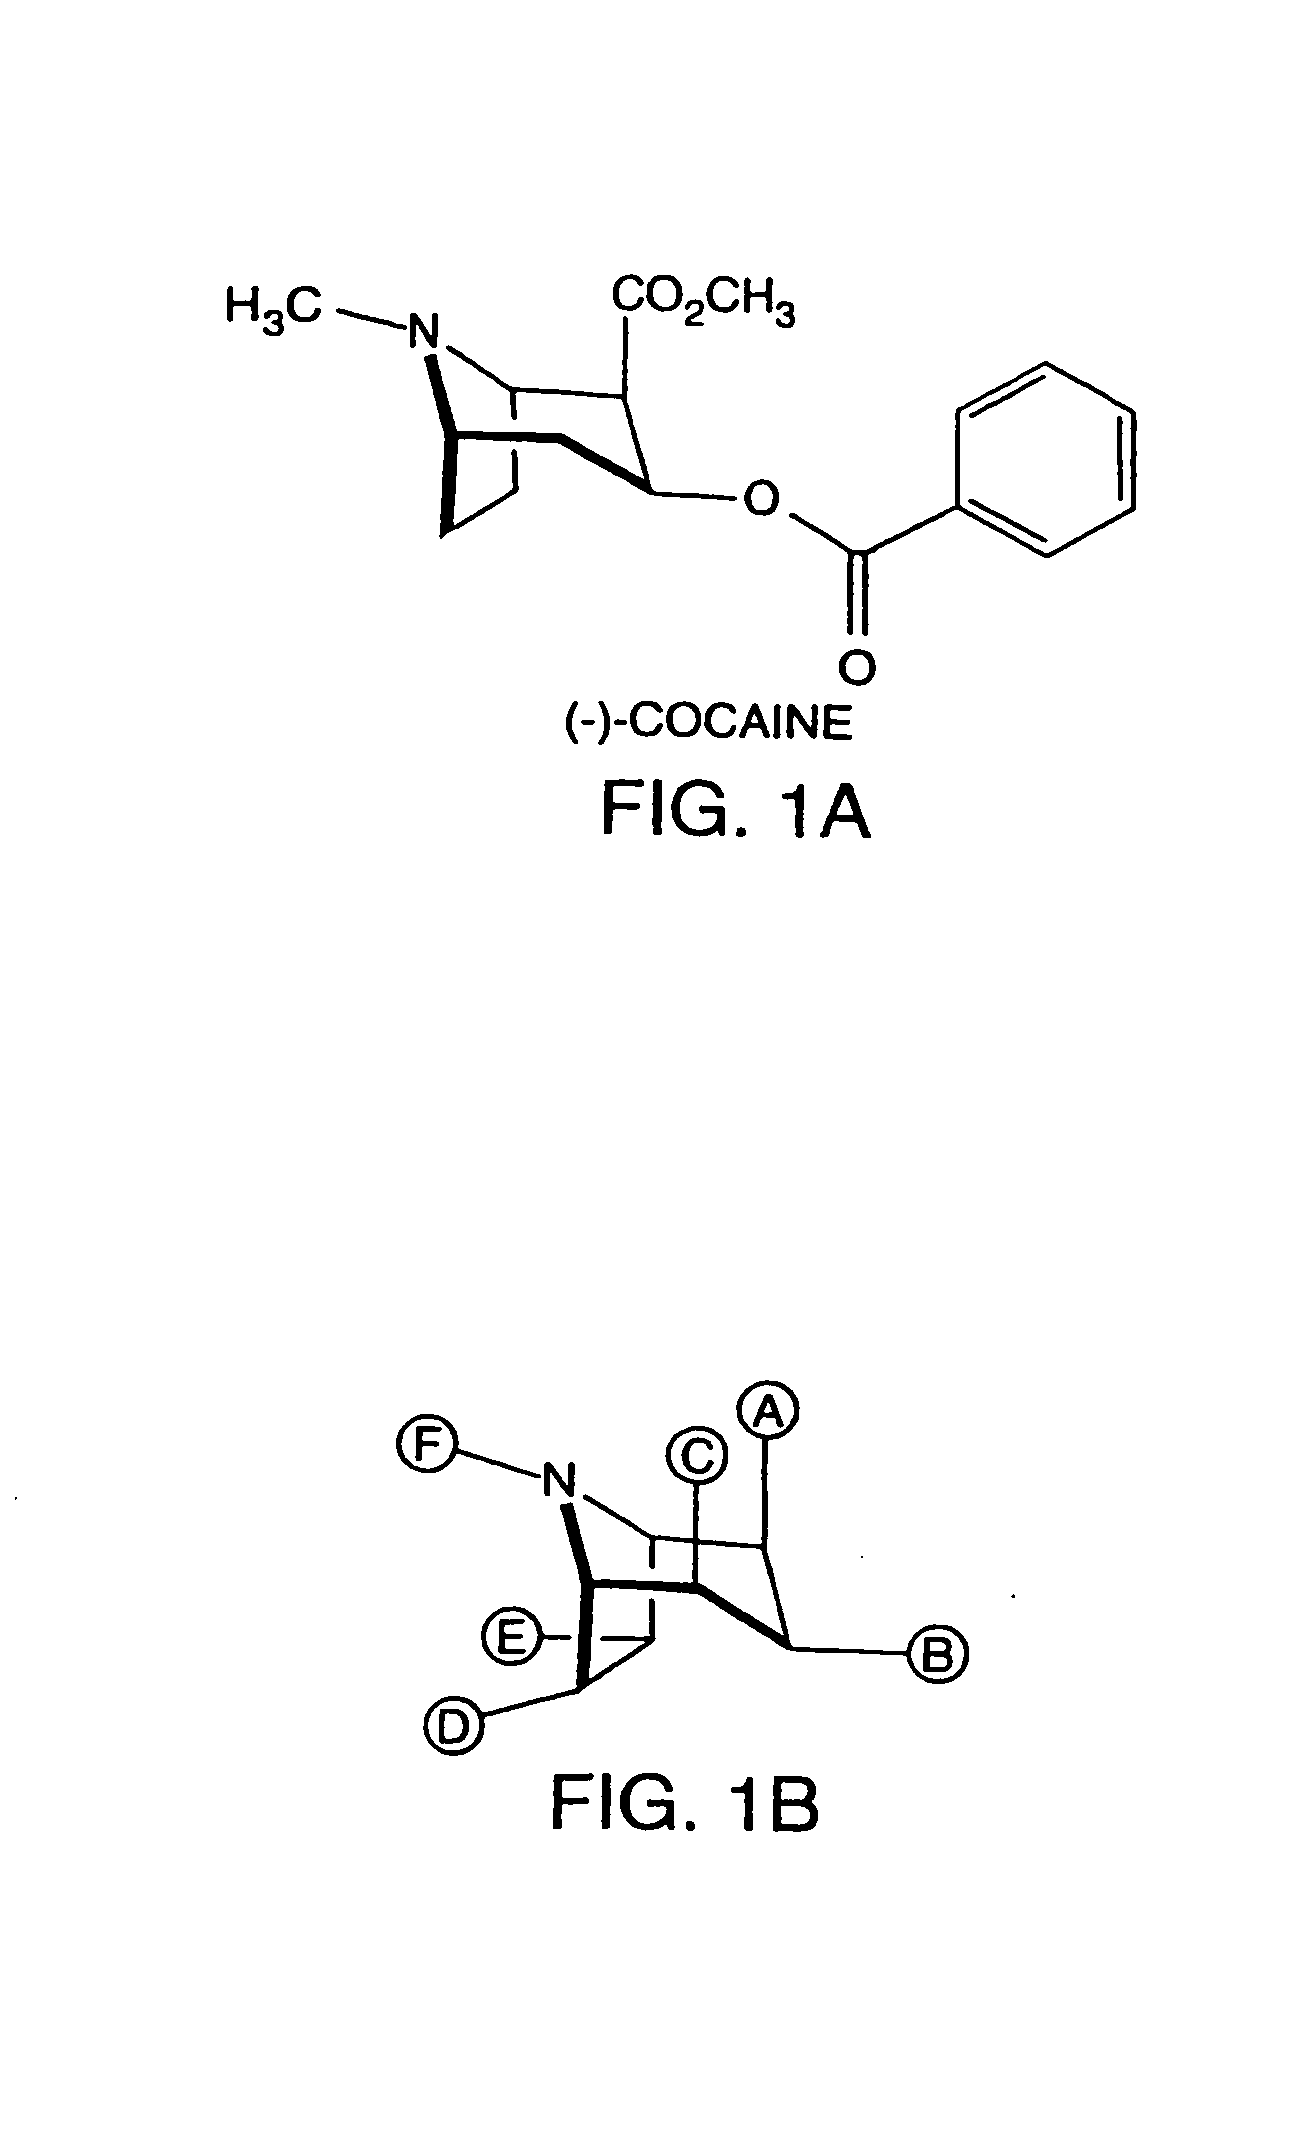 Hapten-carrier conjugates for use in drug-abuse therapy and methods for preparation of same